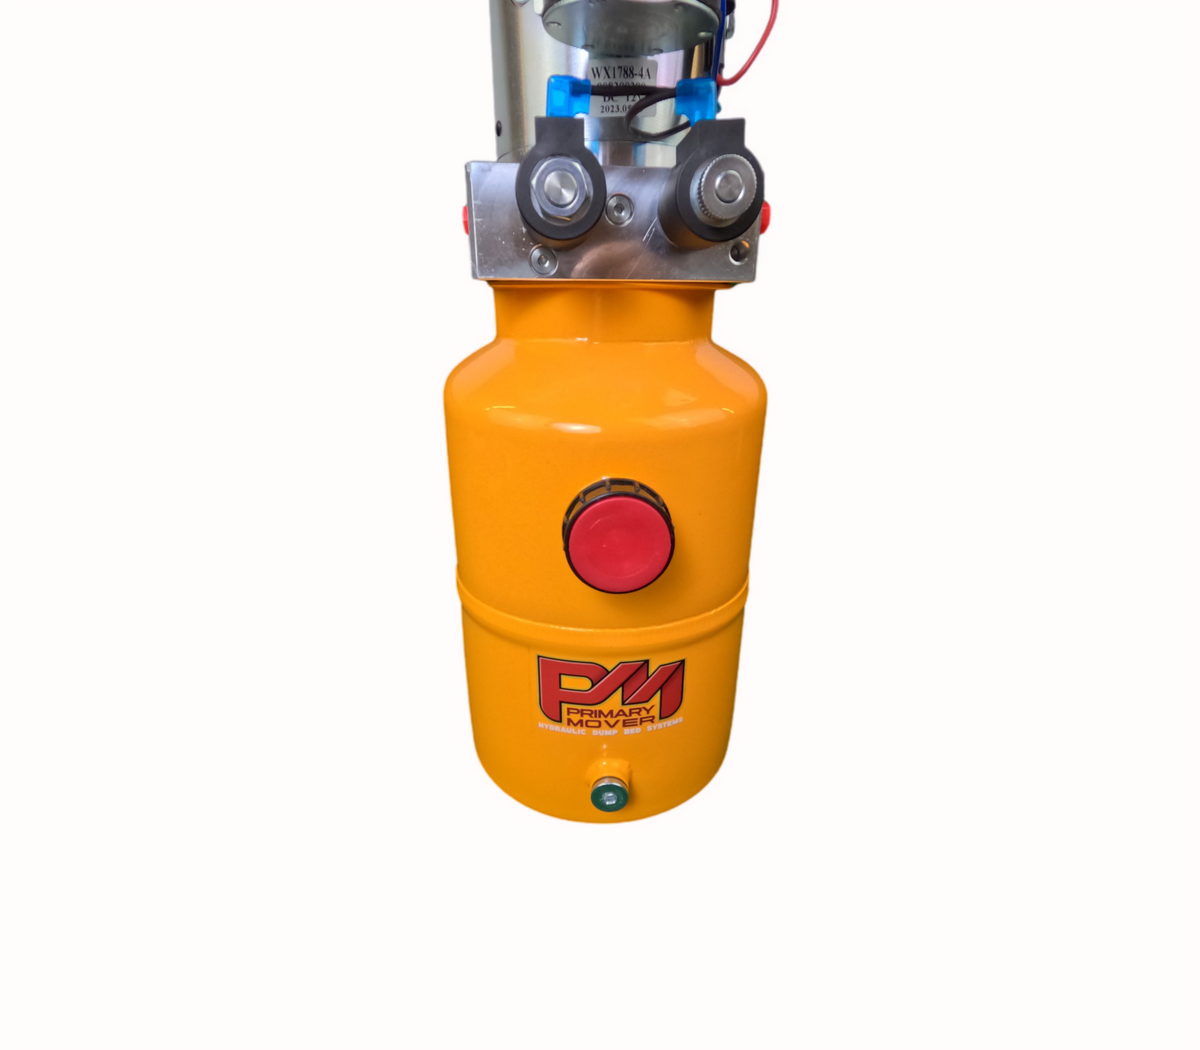 DLH 12V Double-Acting Hydraulic Pump with Steel Reservoir: Dual-acting pump with red button on yellow cylinder, offering reliable hydraulic power, enhanced functionality, robust construction, versatile compatibility, and optimized performance.